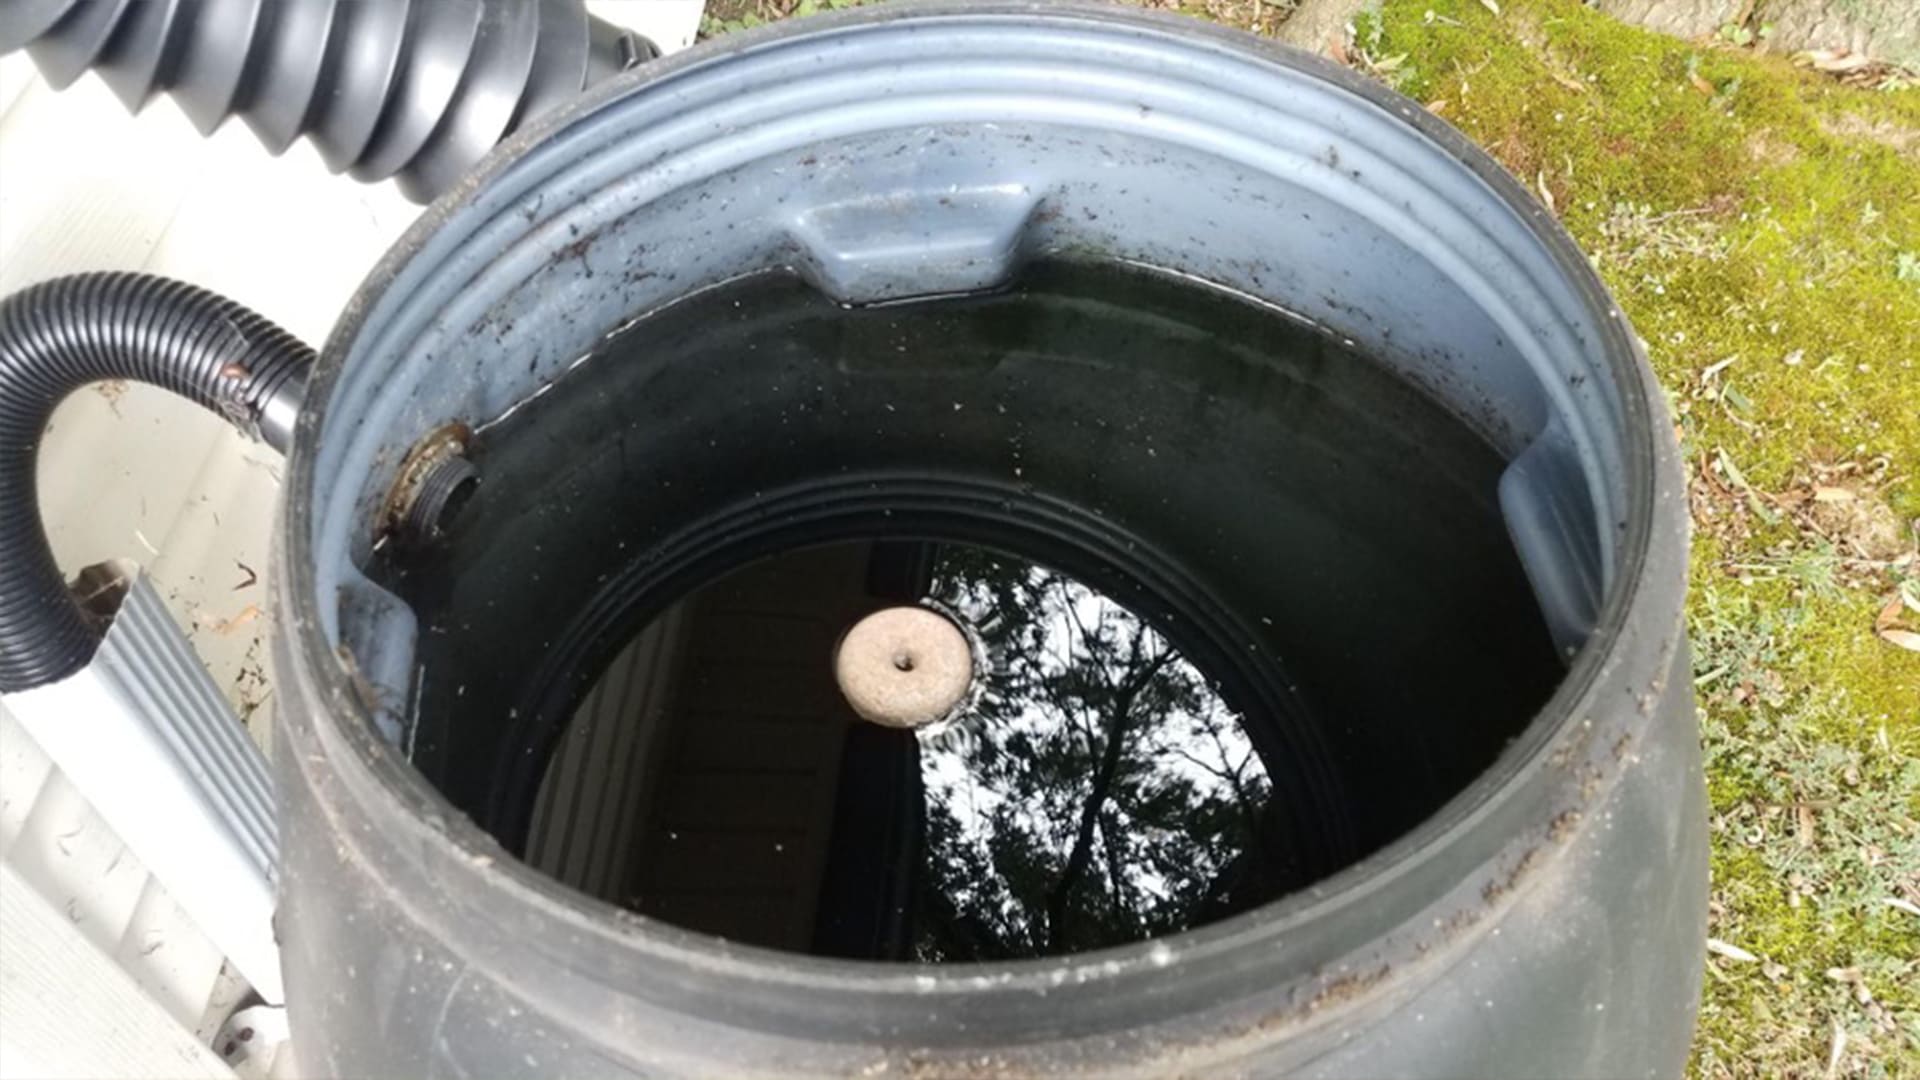 Tips For Keeping Your Rain Barrel Mosquito-Free